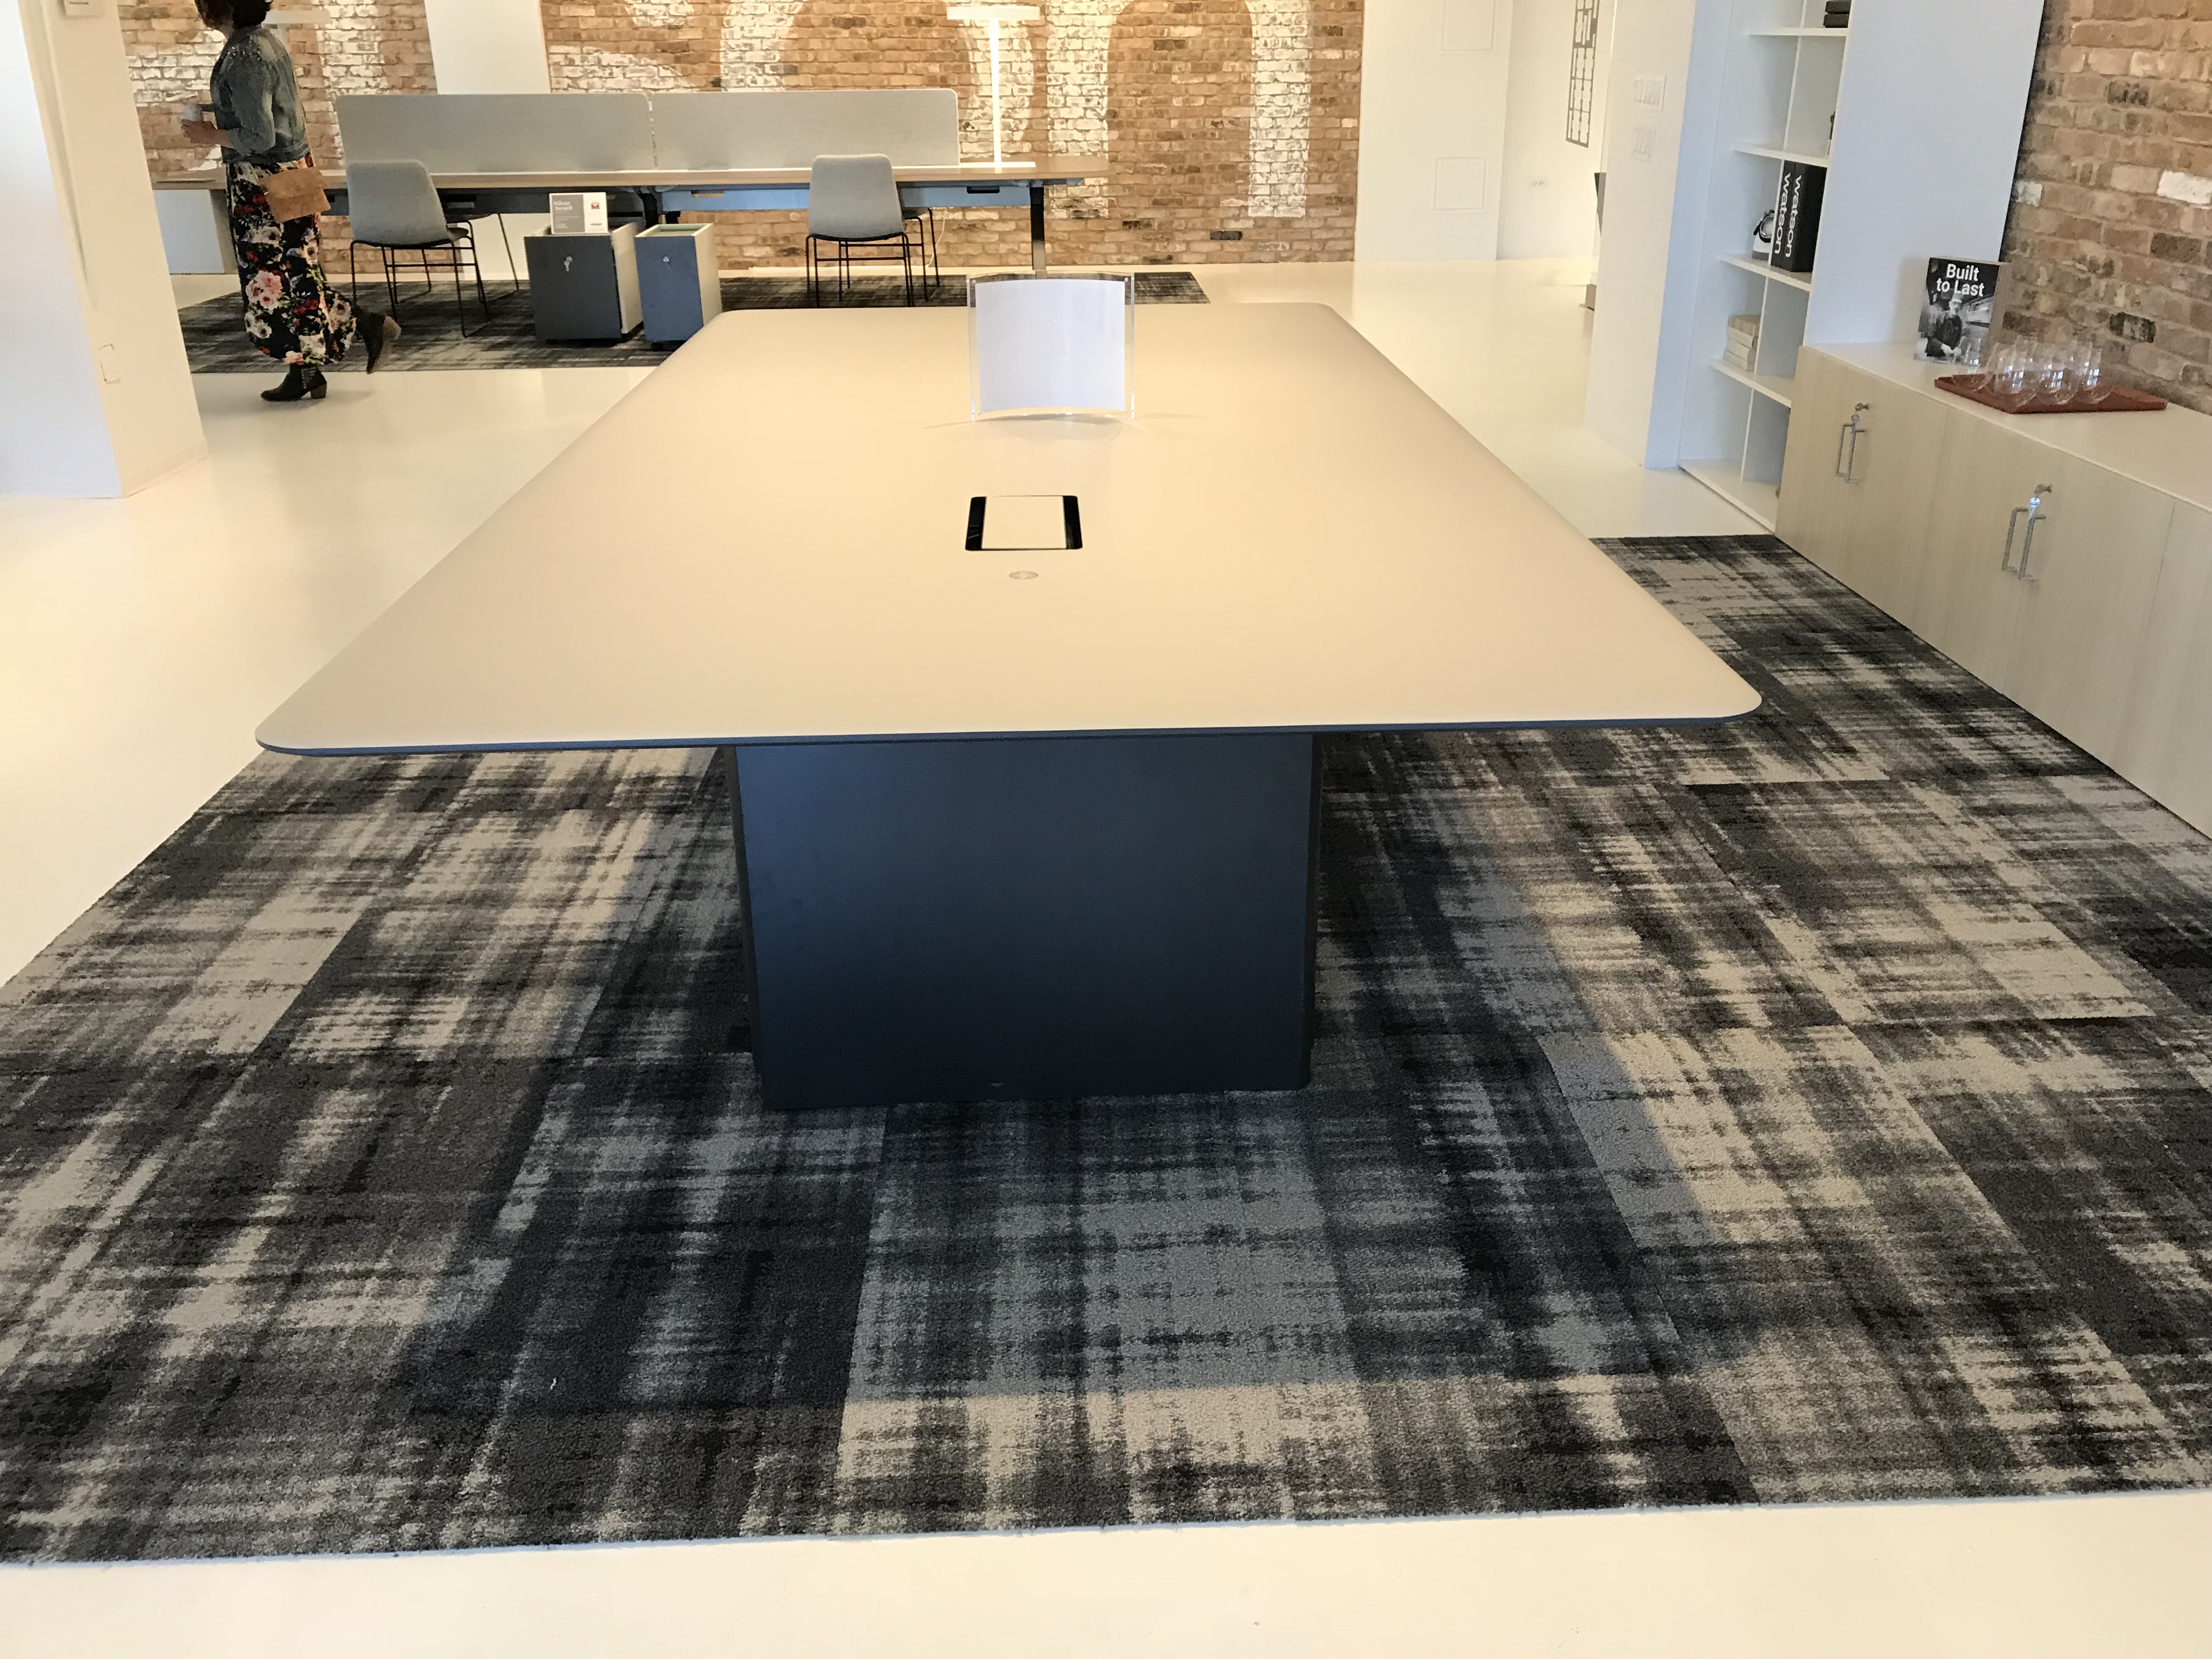 At NeoCon 2018: Tia is Thoughtful, Integrated, Adjustable